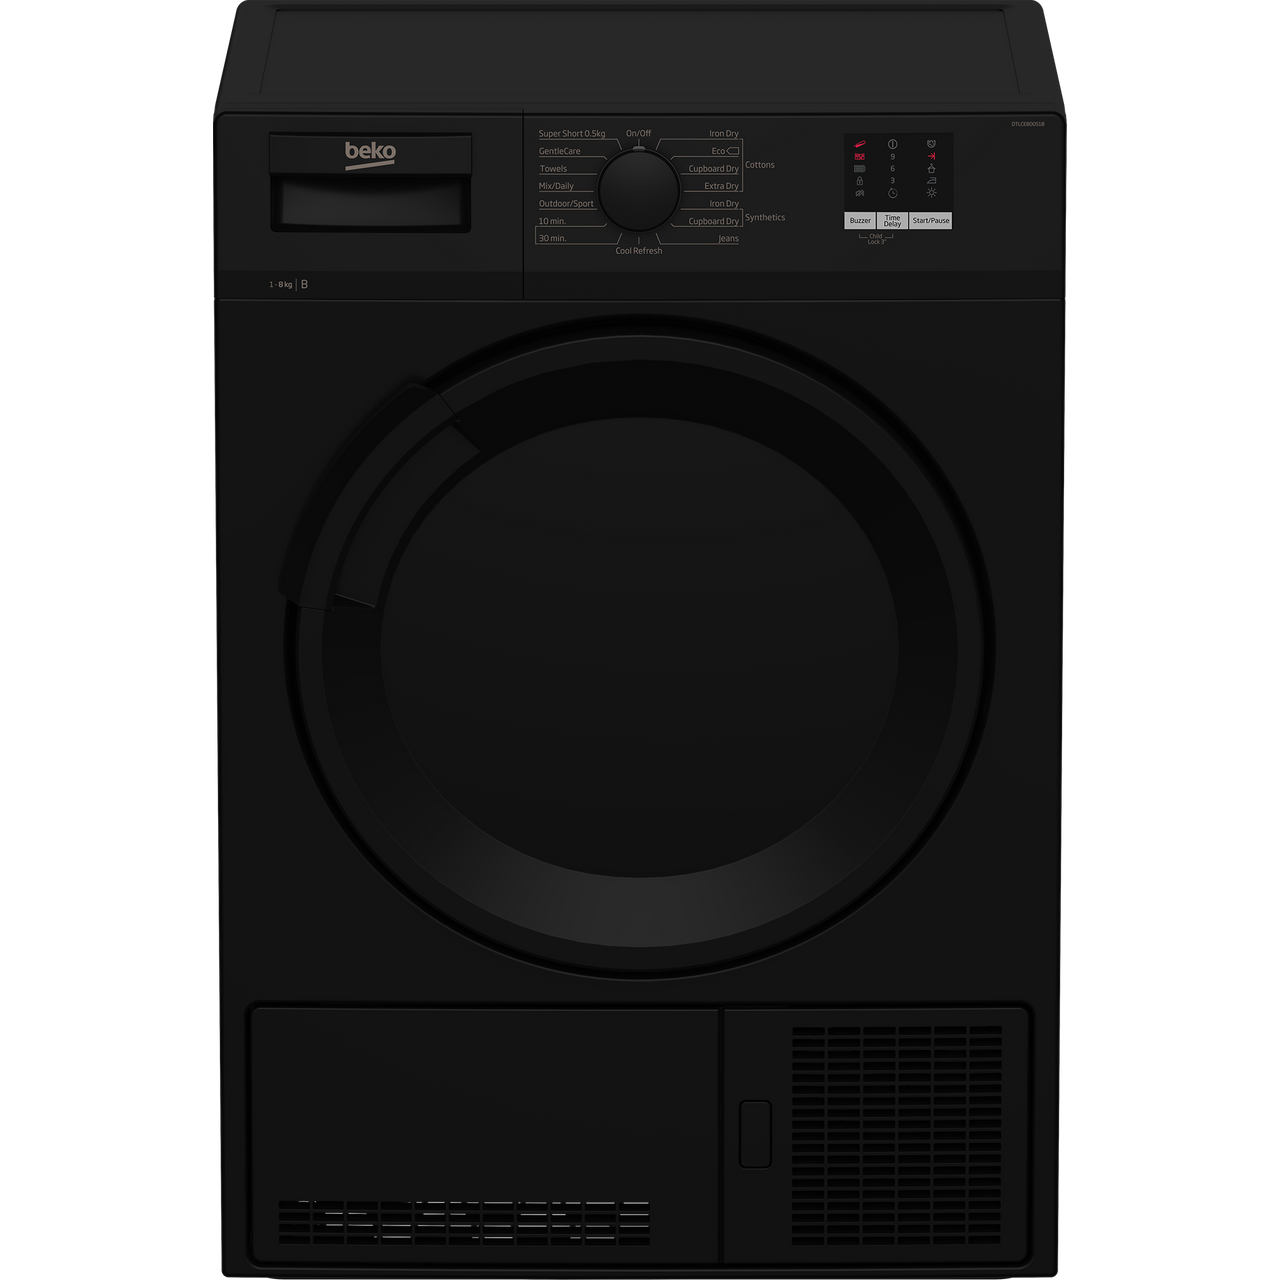 Beko DTLCE80051B 8Kg Condenser Tumble Dryer Review